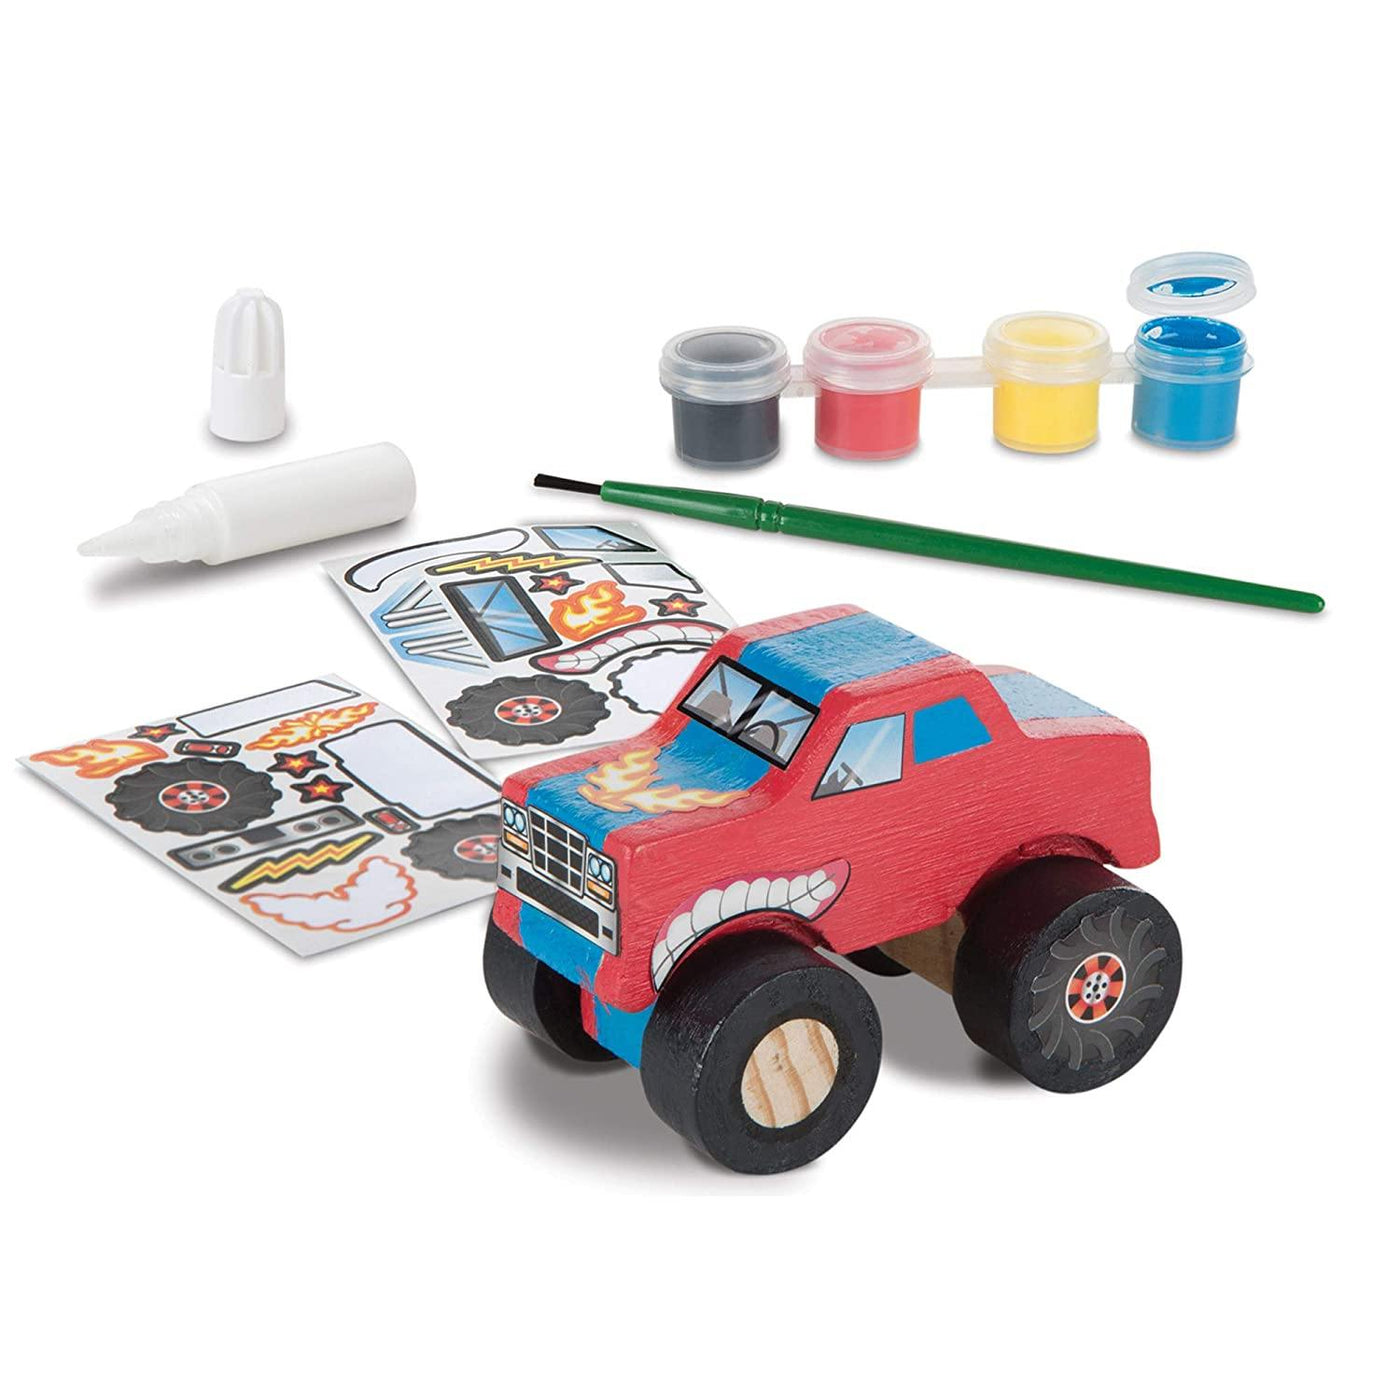 Created by Me! Monster Truck Wooden Craft Kit - Krazy Caterpillar 